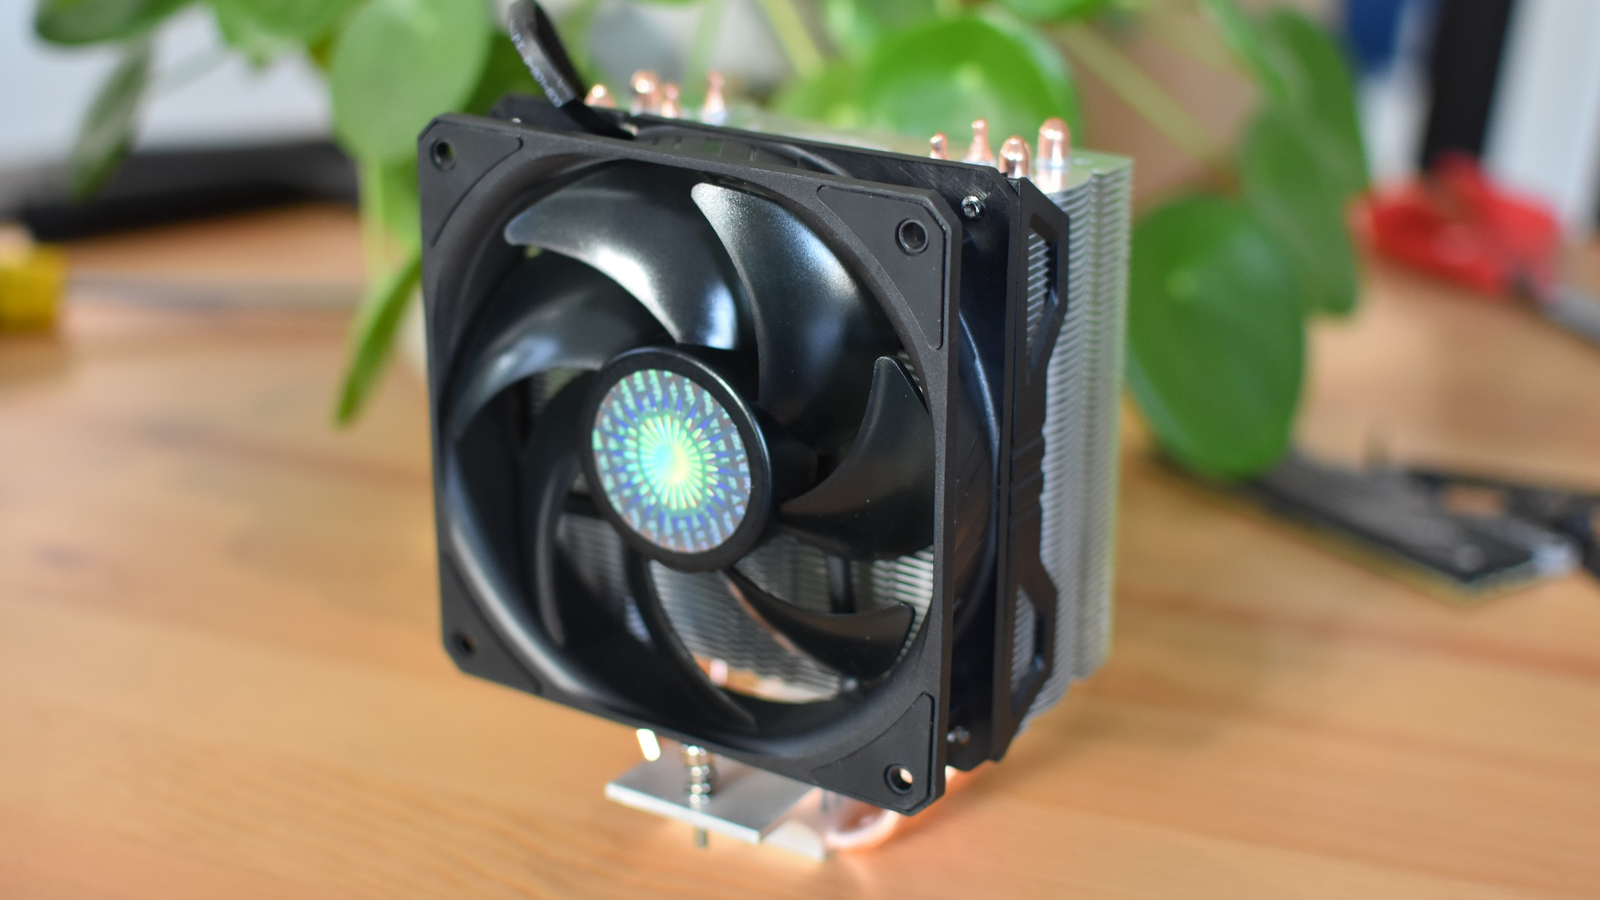 The Cooler Master Hyper 212 Evo V2 is a perfect CPU cooler for first PC  builds, and it's on sale for Prime Big Deal Days